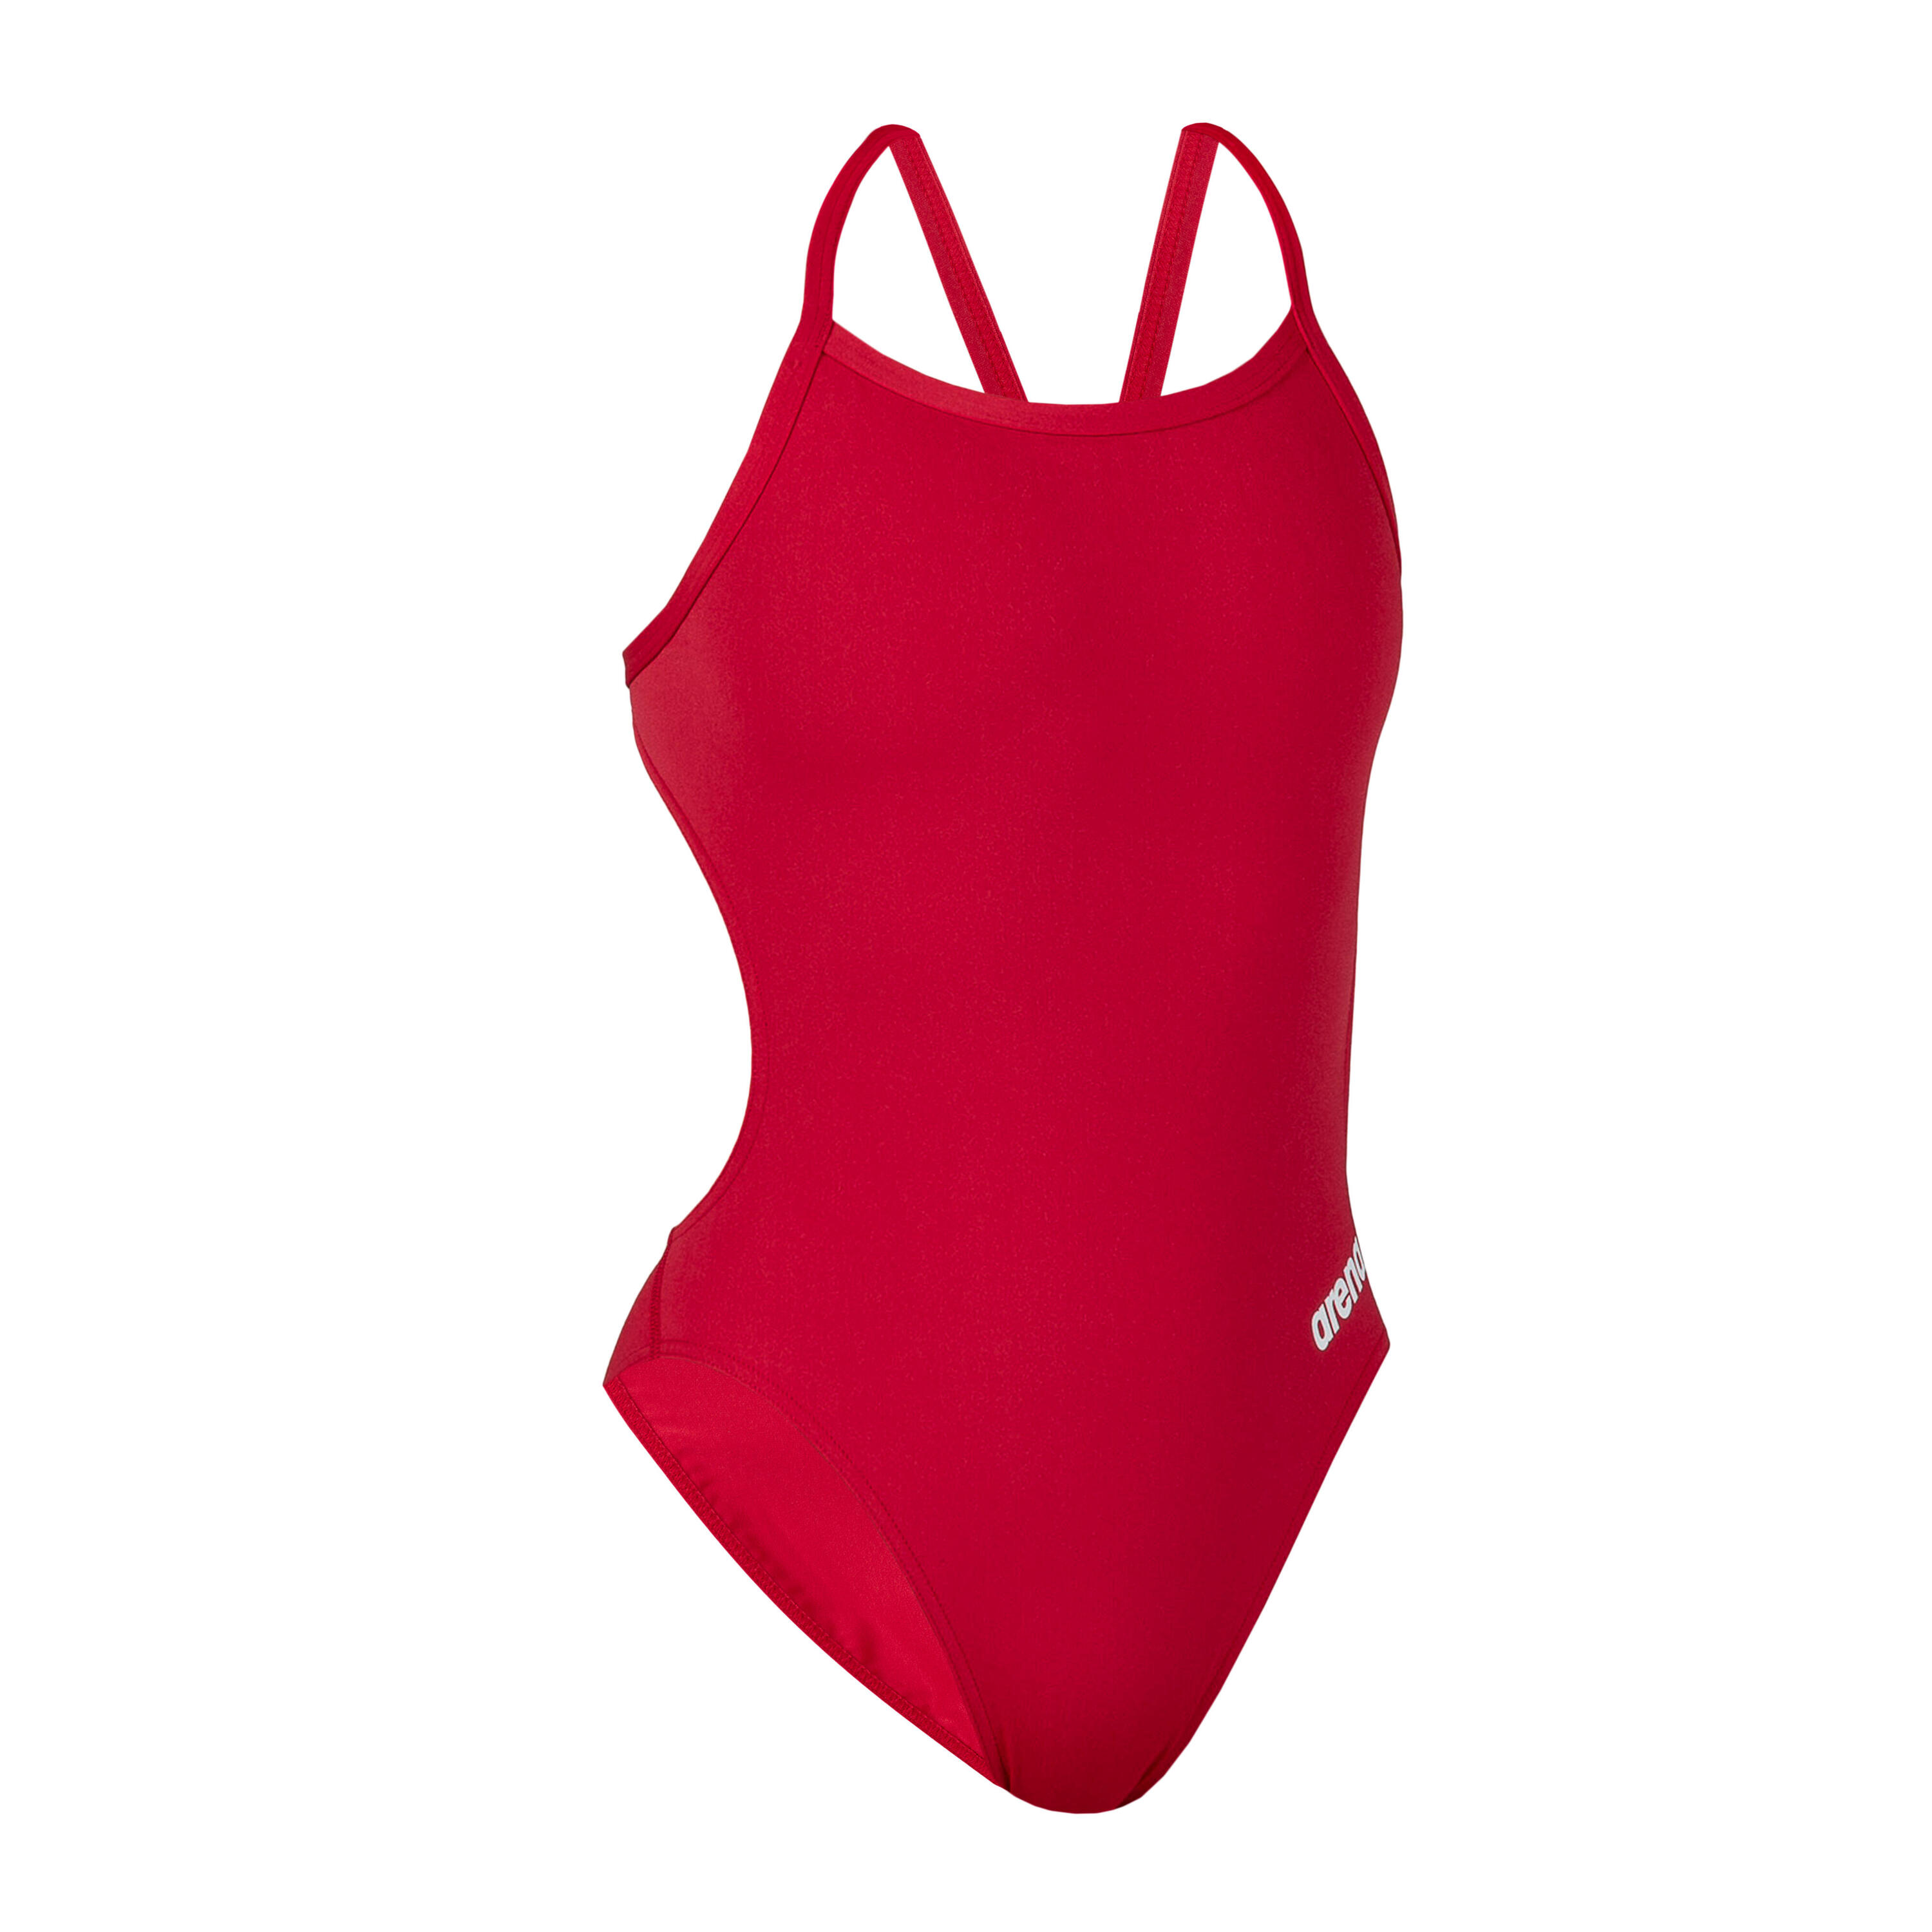 Women's 1-piece Swimsuit ARENA NEW SOLID Red 4/4